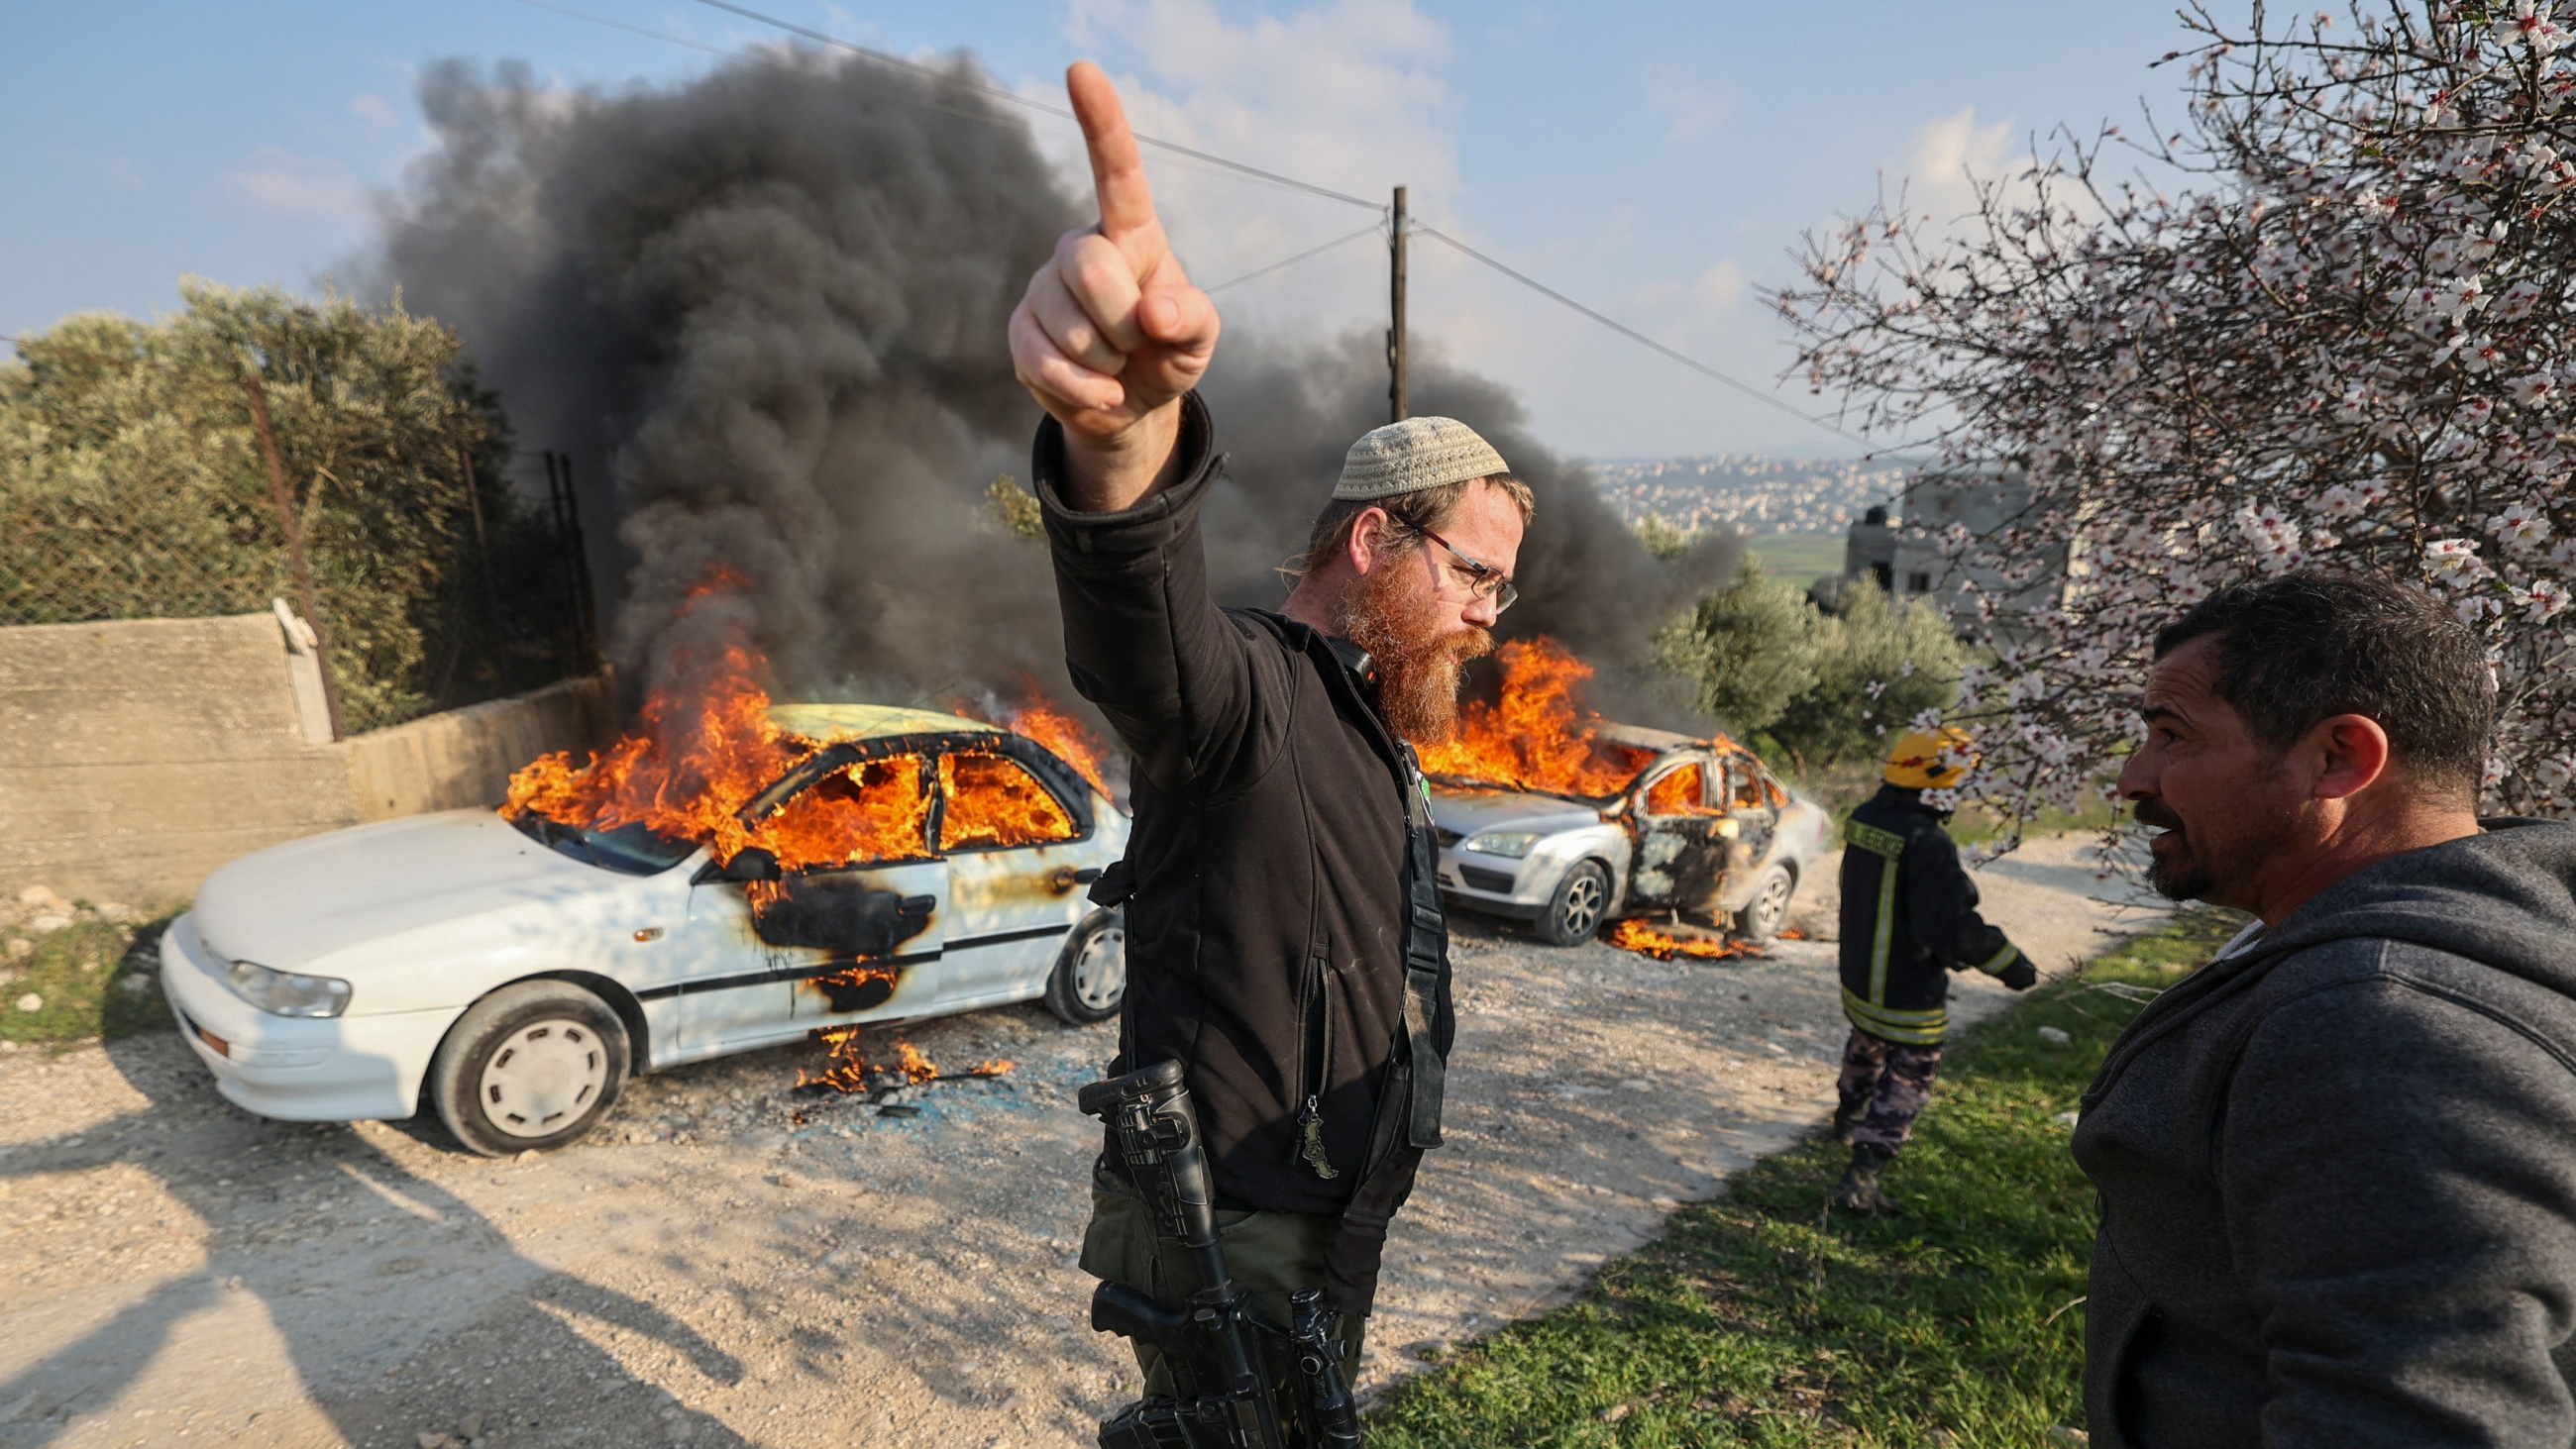 Armed Israeli settler gestures amid confrontations between settlers and Palestinians in Burin village near Nablus in occupied West Bank on 25 February 2023 (AFP)